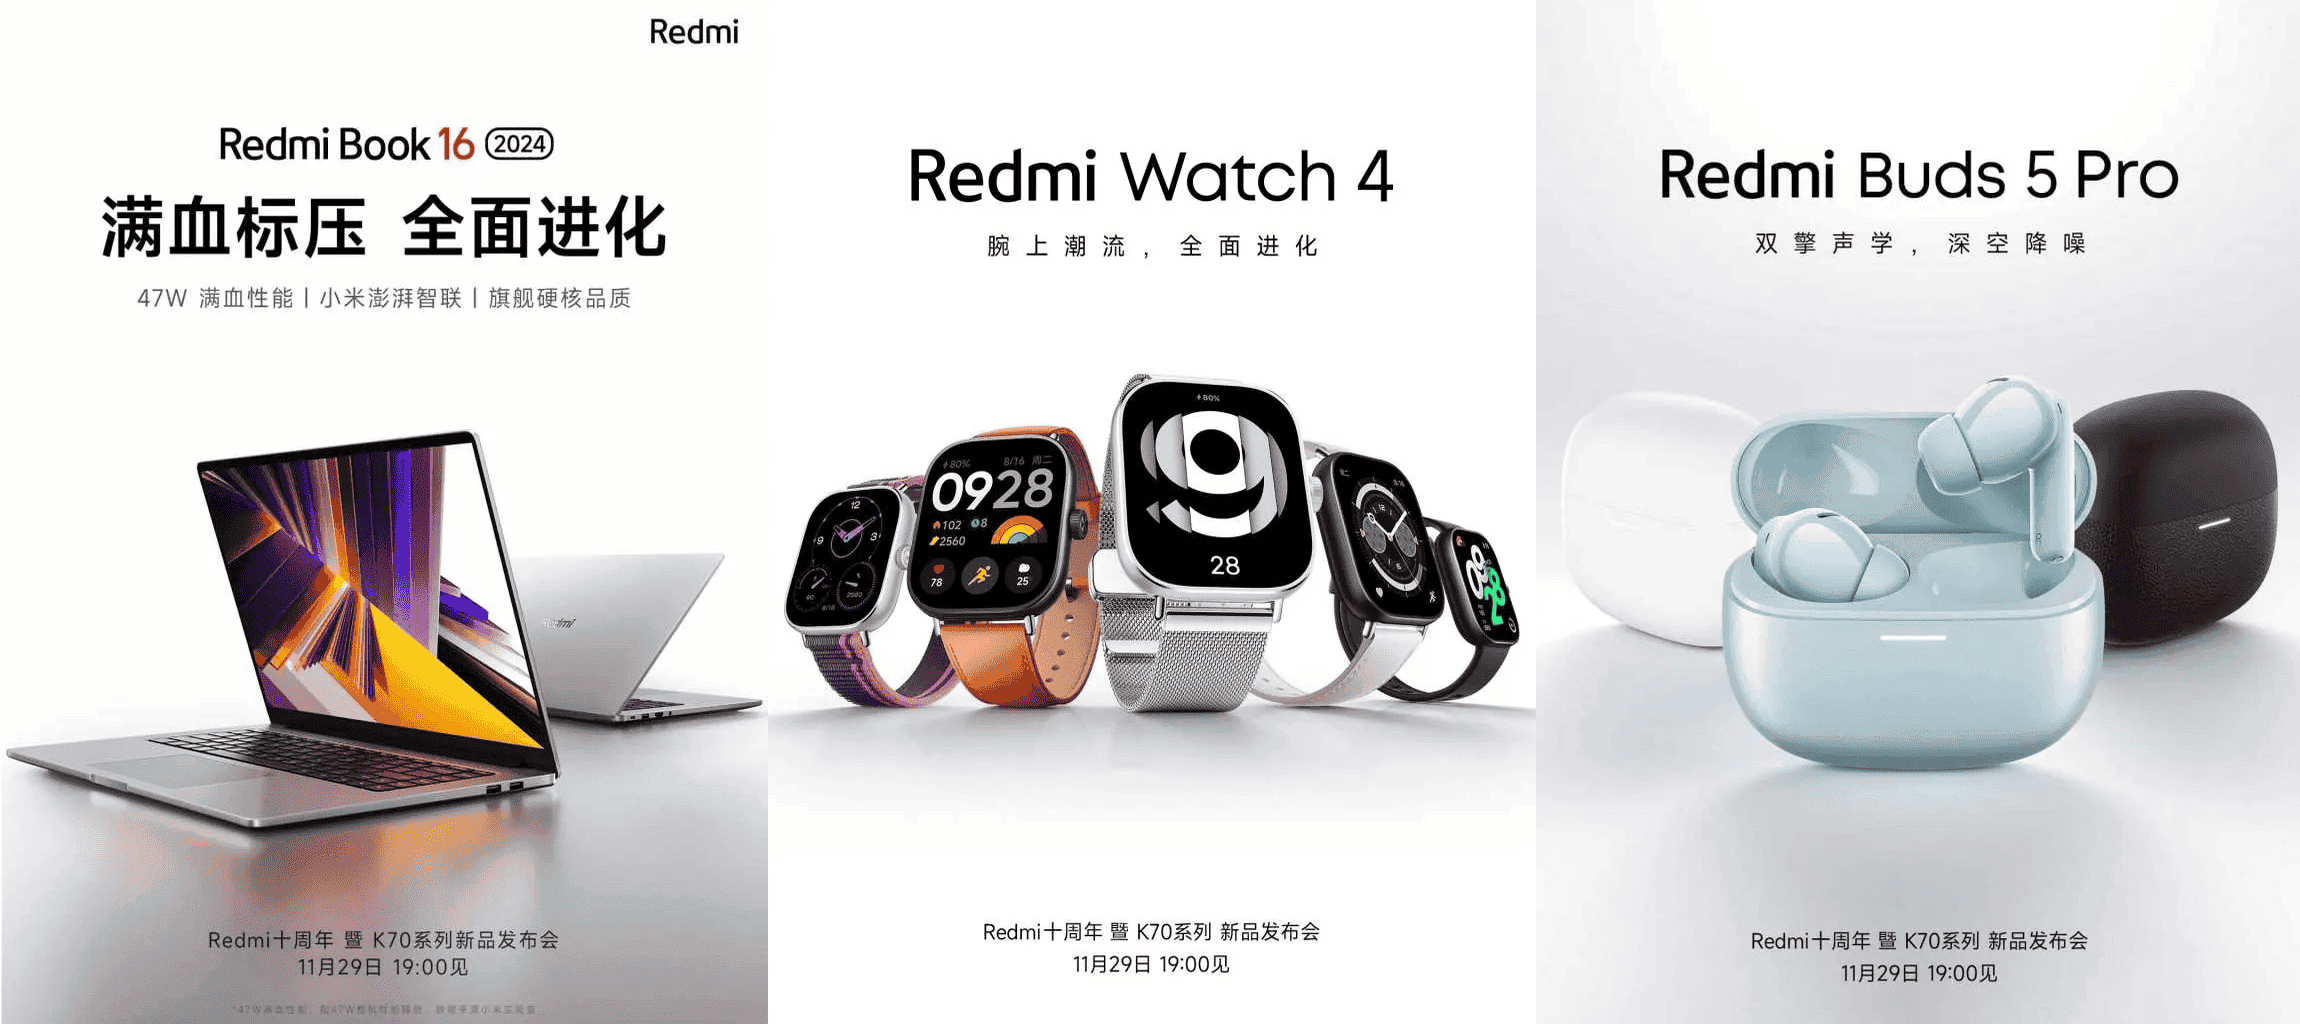 Redmi Watch 4 and Redmi Buds 5 Pro also go official -  news